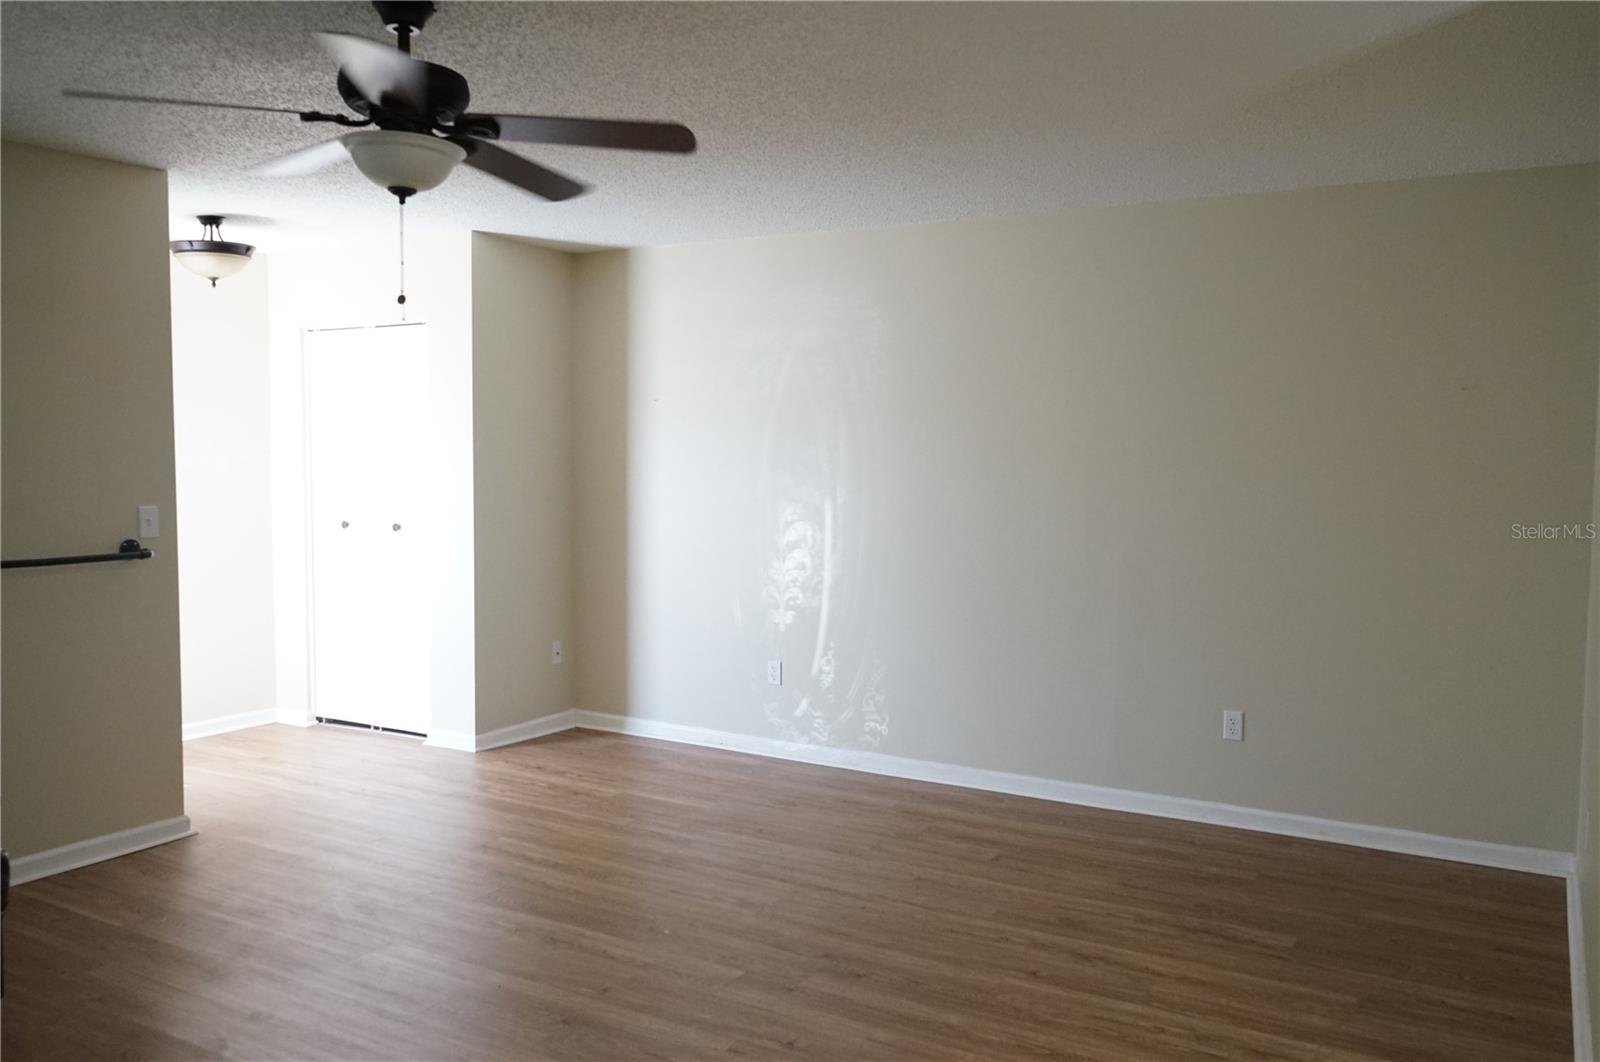 entry has a coat closet and laminate floors in living room